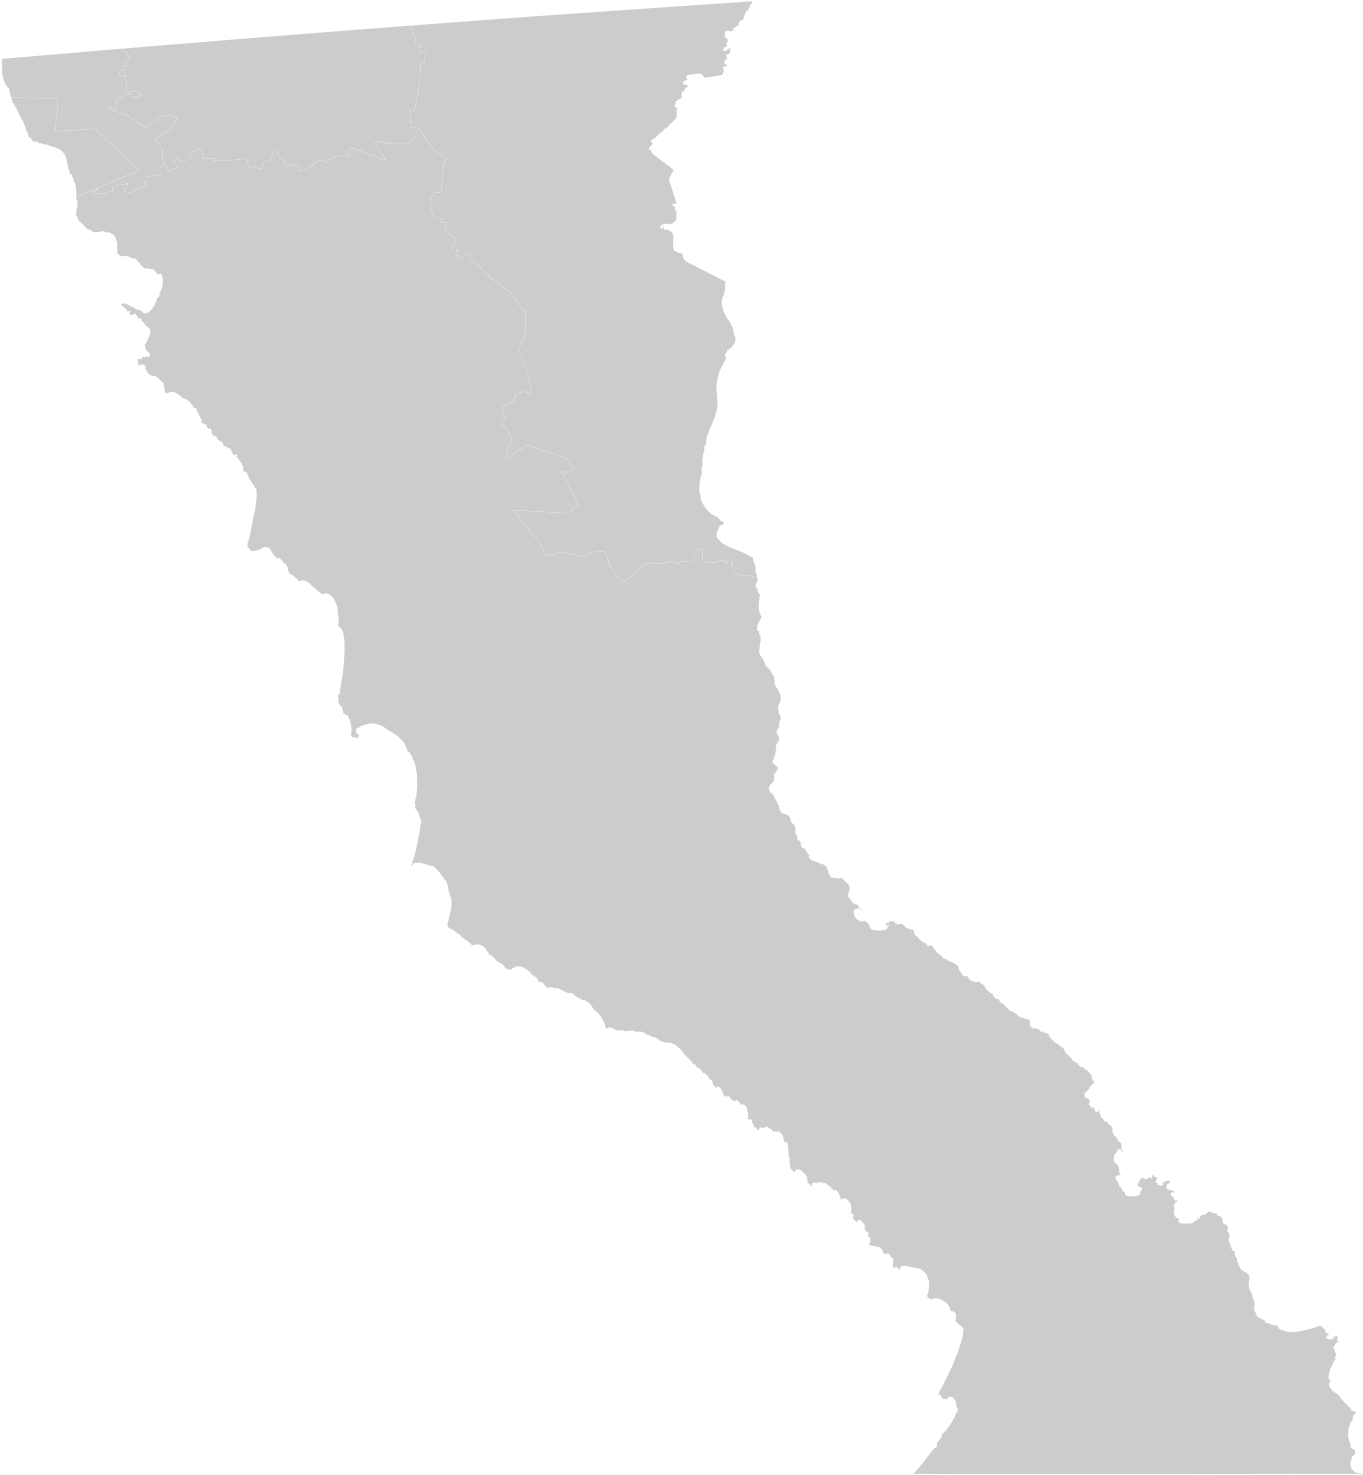 California State Outline Silhouette PNG image